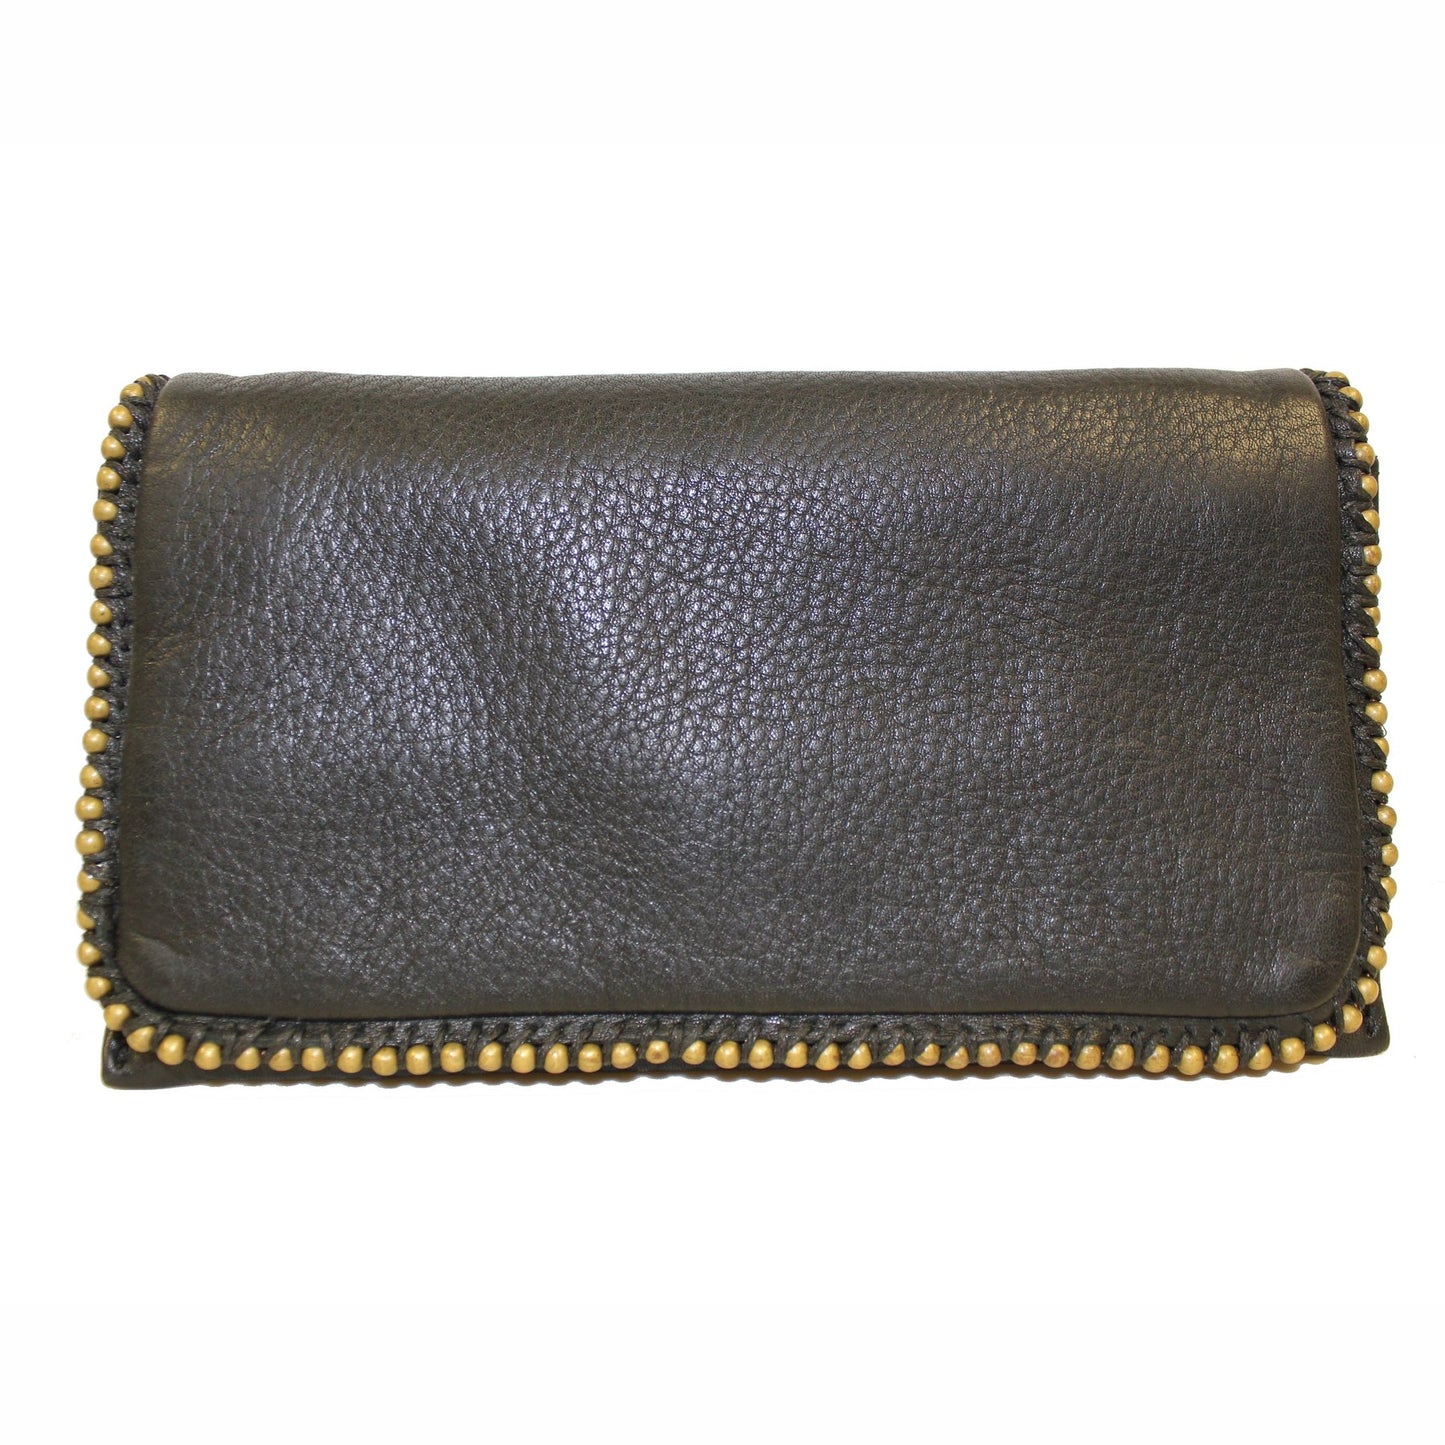 Load image into Gallery viewer, Naomi Leather Flapover Wallet with Decorative Edging
